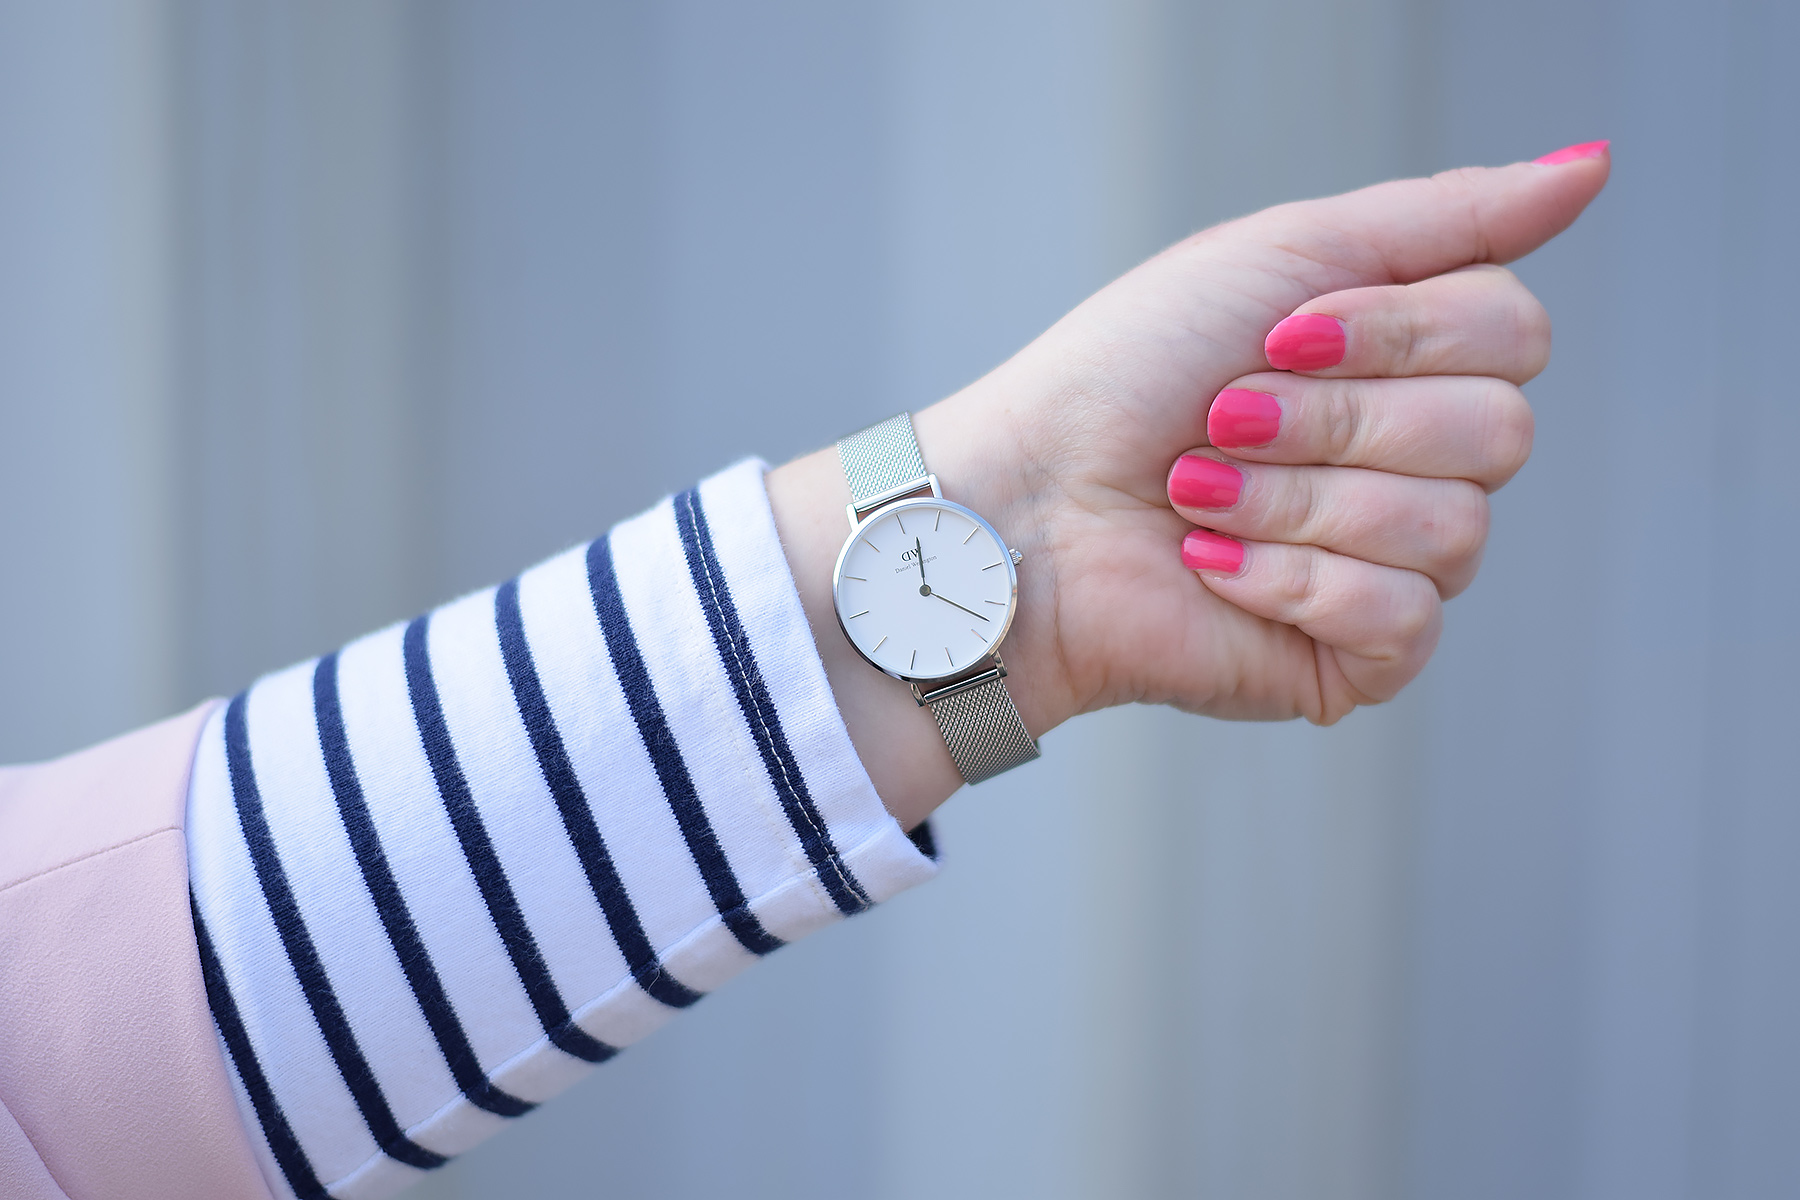 Daniel Wellington Classic Petite Watch in silver and white colour ootd